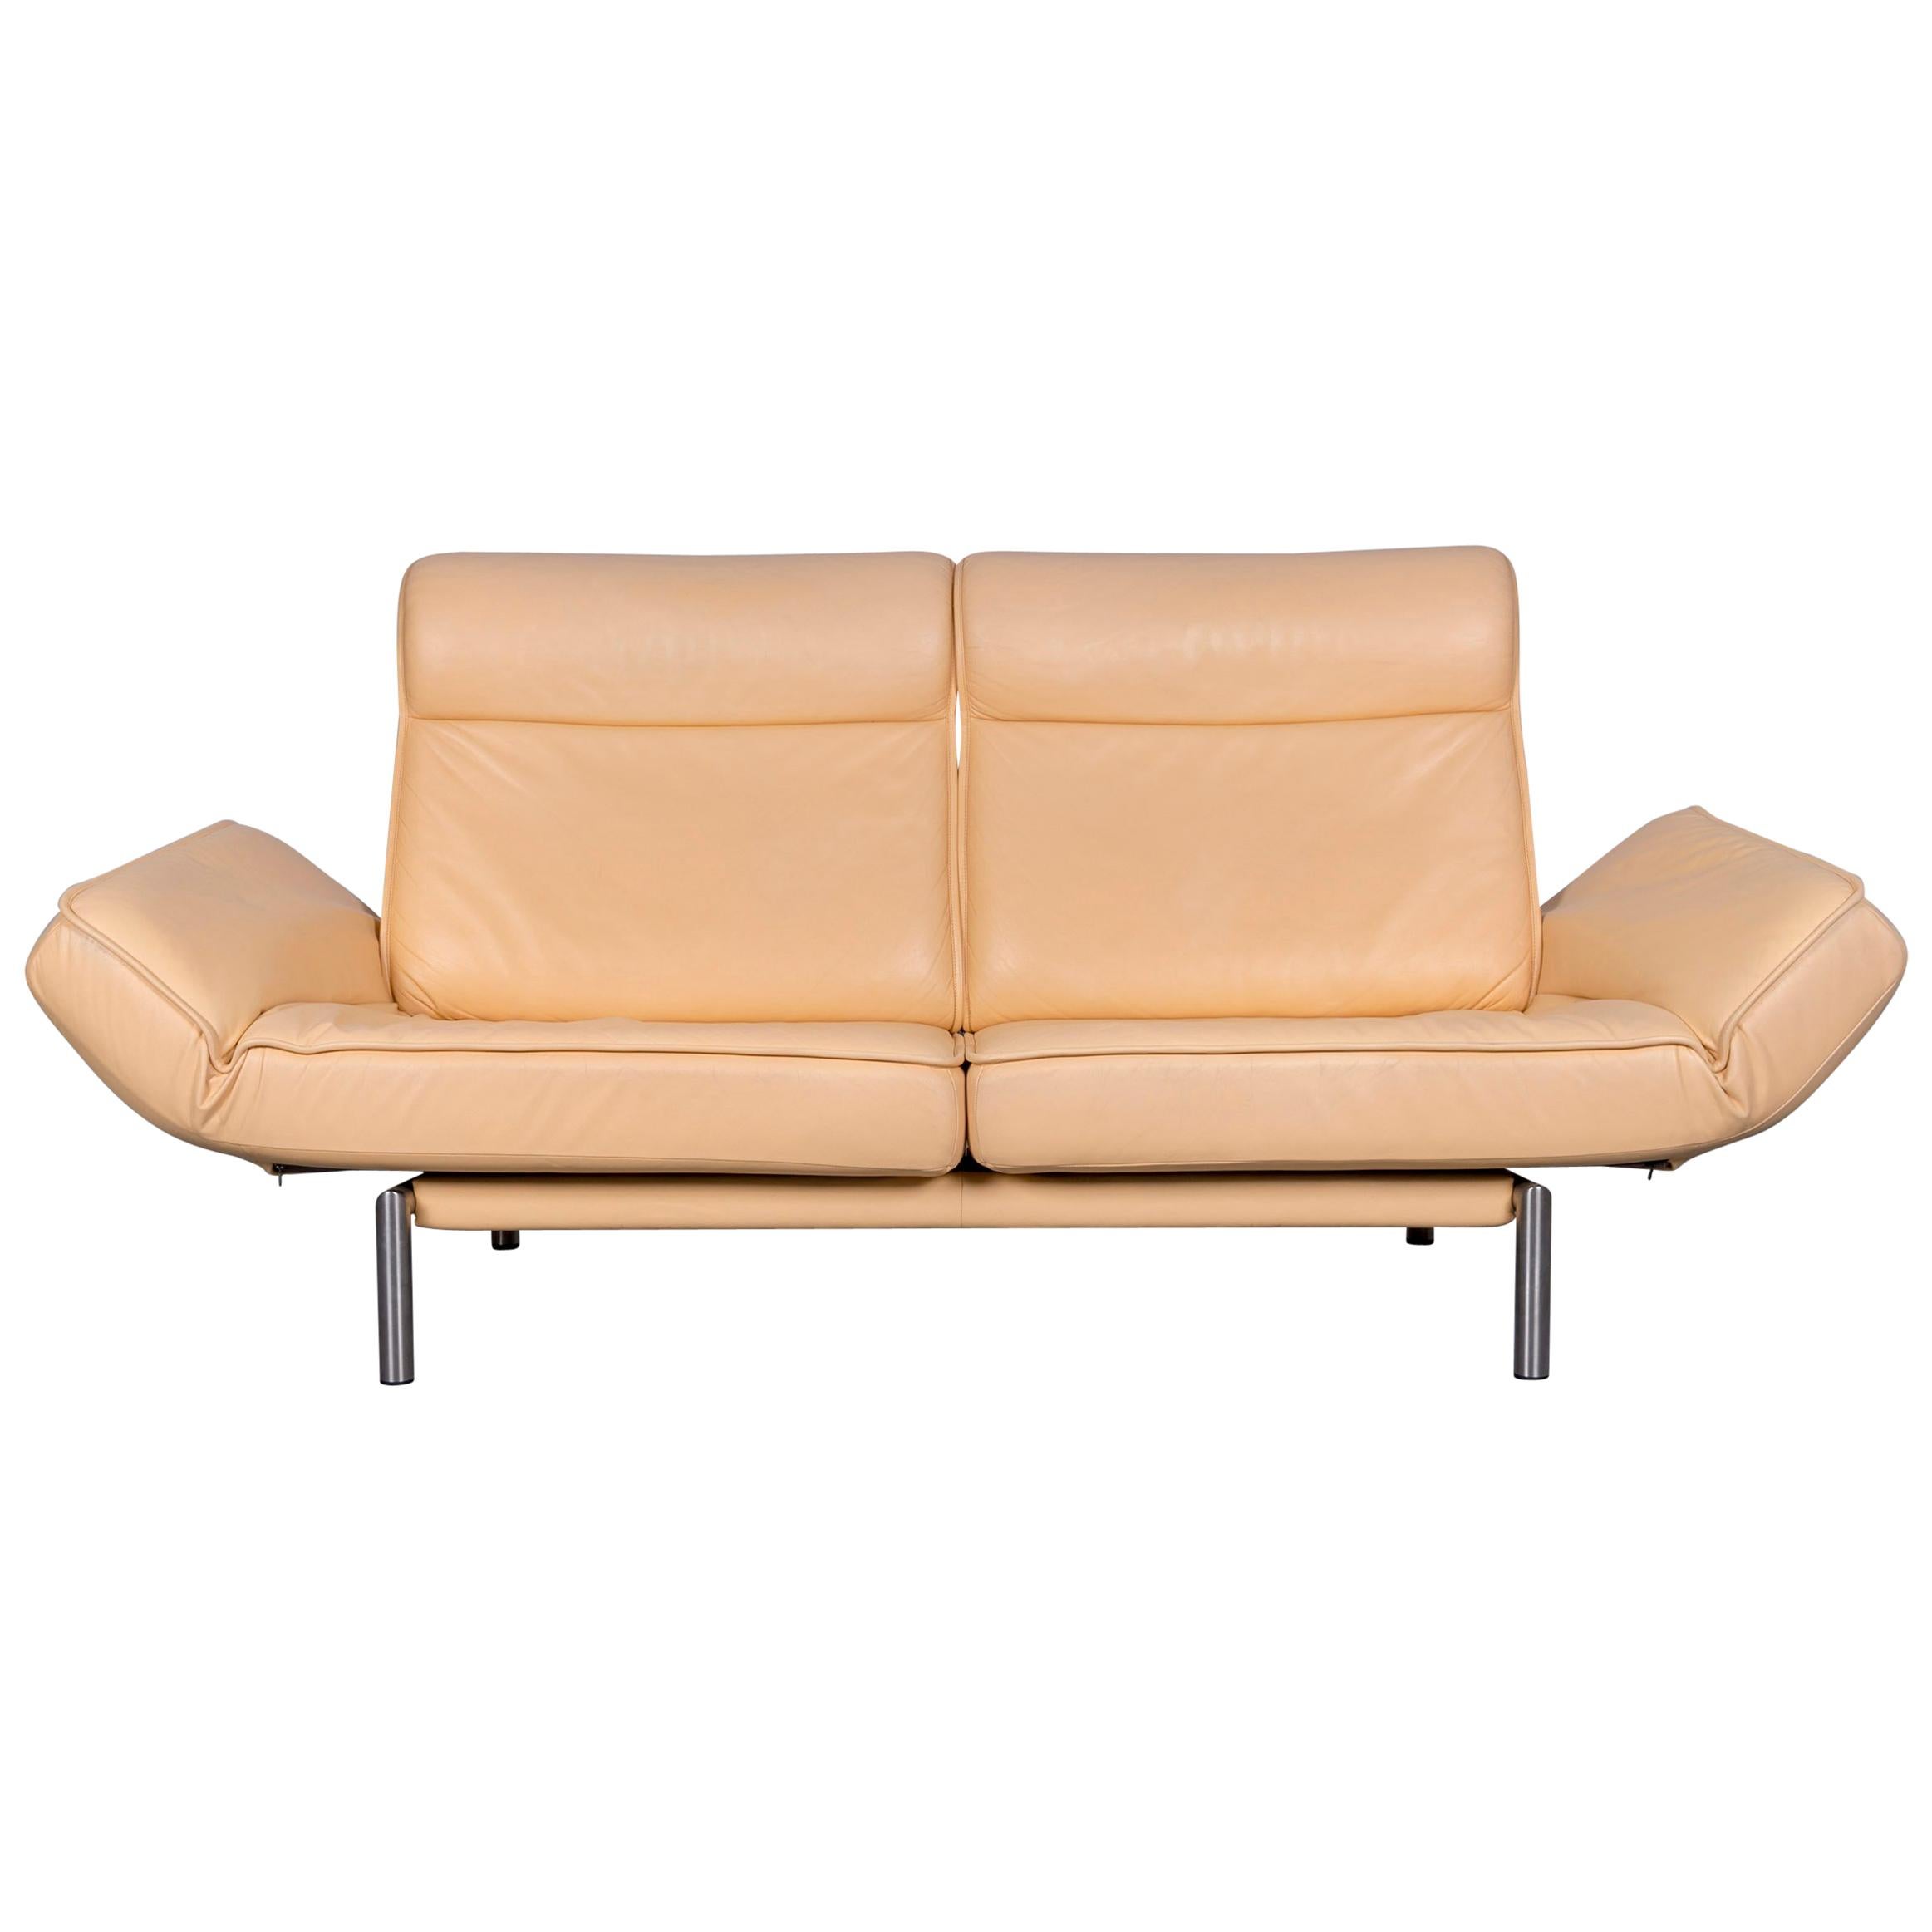 De Sede Ds 450 Designer Sofa Beige Leather Two-Seat Couch For Sale